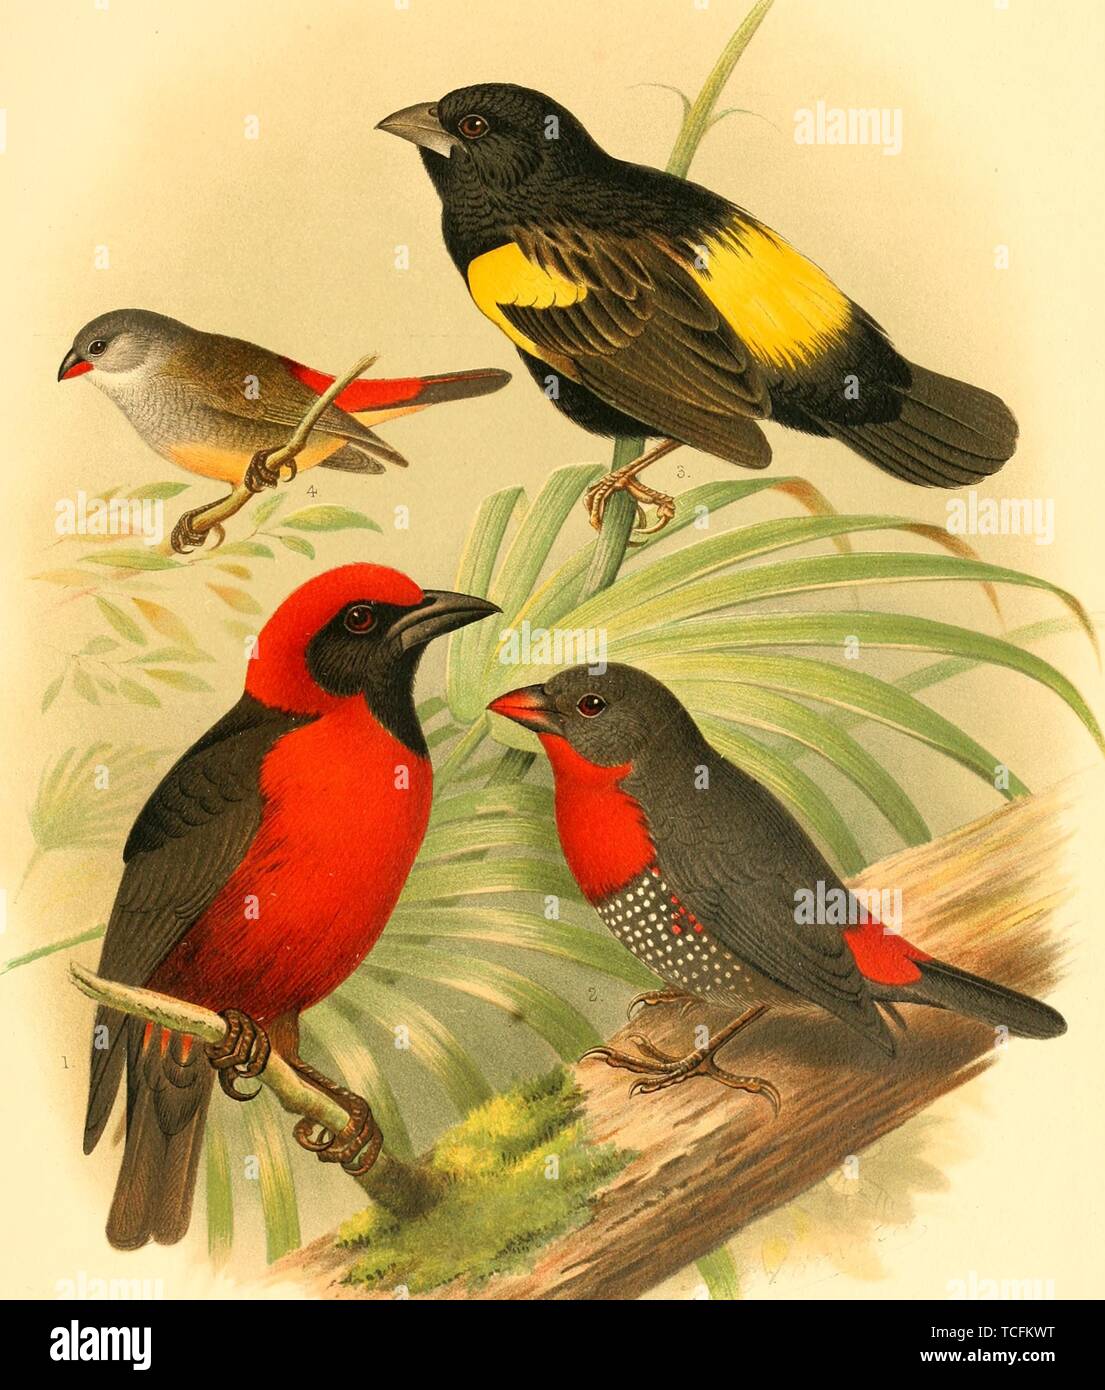 Engraved drawing of the Finches, Red-bellied Malimbe (Malimbus erythrogaster), Grant's Bluebill (Spermophaga poliogenys), Yellow Bishop (Euplectes capensis), and Yellow-breasted Chat (Icteria virens), from the book 'Aves, 1910. Appendix' by William Robert Ogilvie-Grant. Courtesy Internet Archive. () Stock Photo